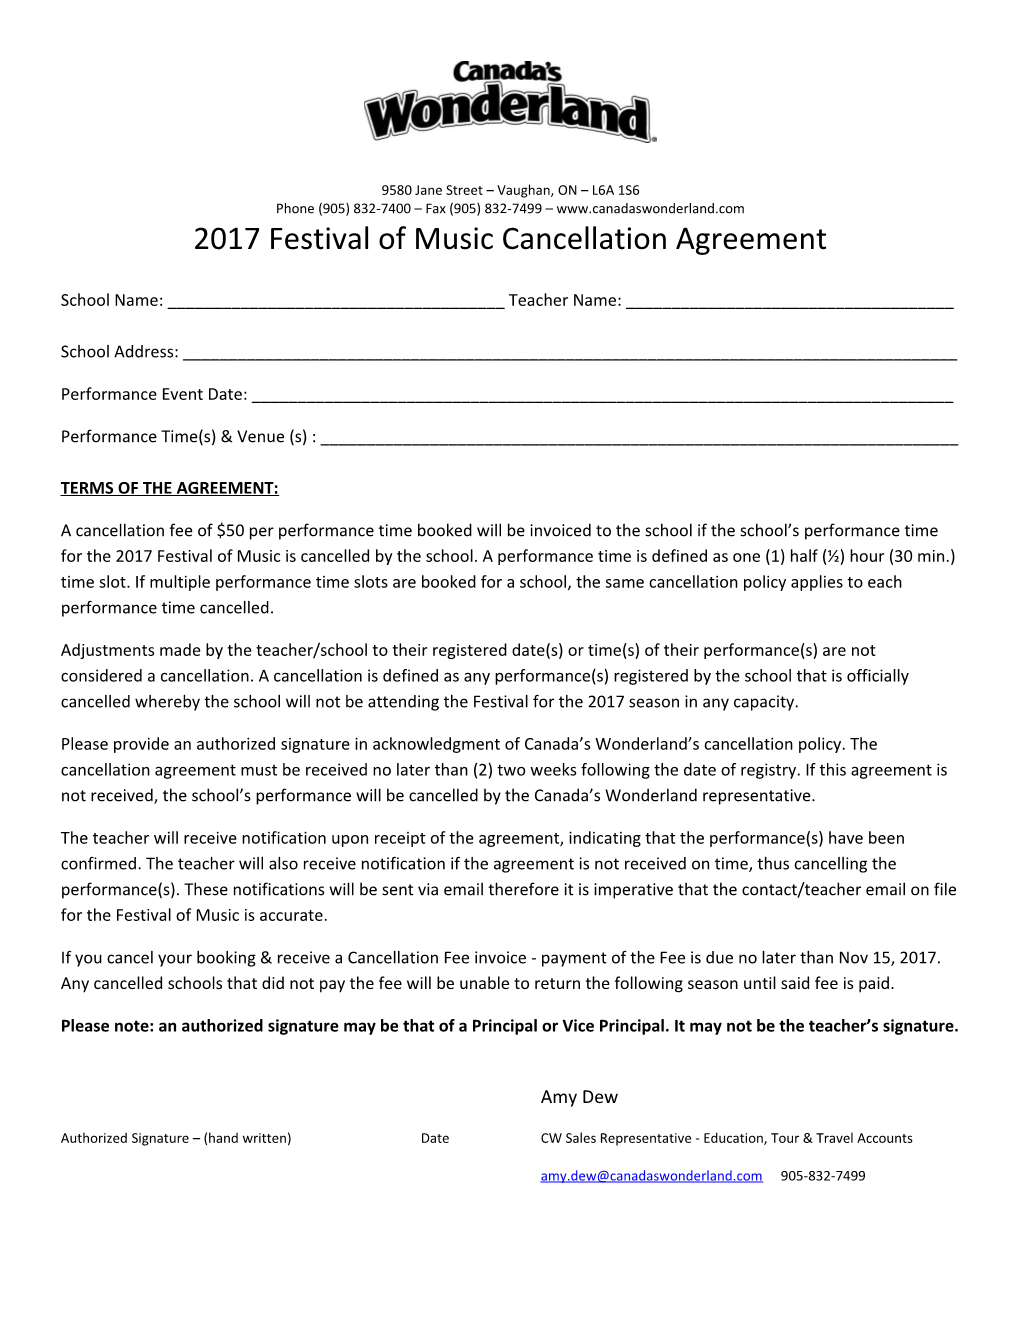 2017 Festival of Music Cancellation Agreement